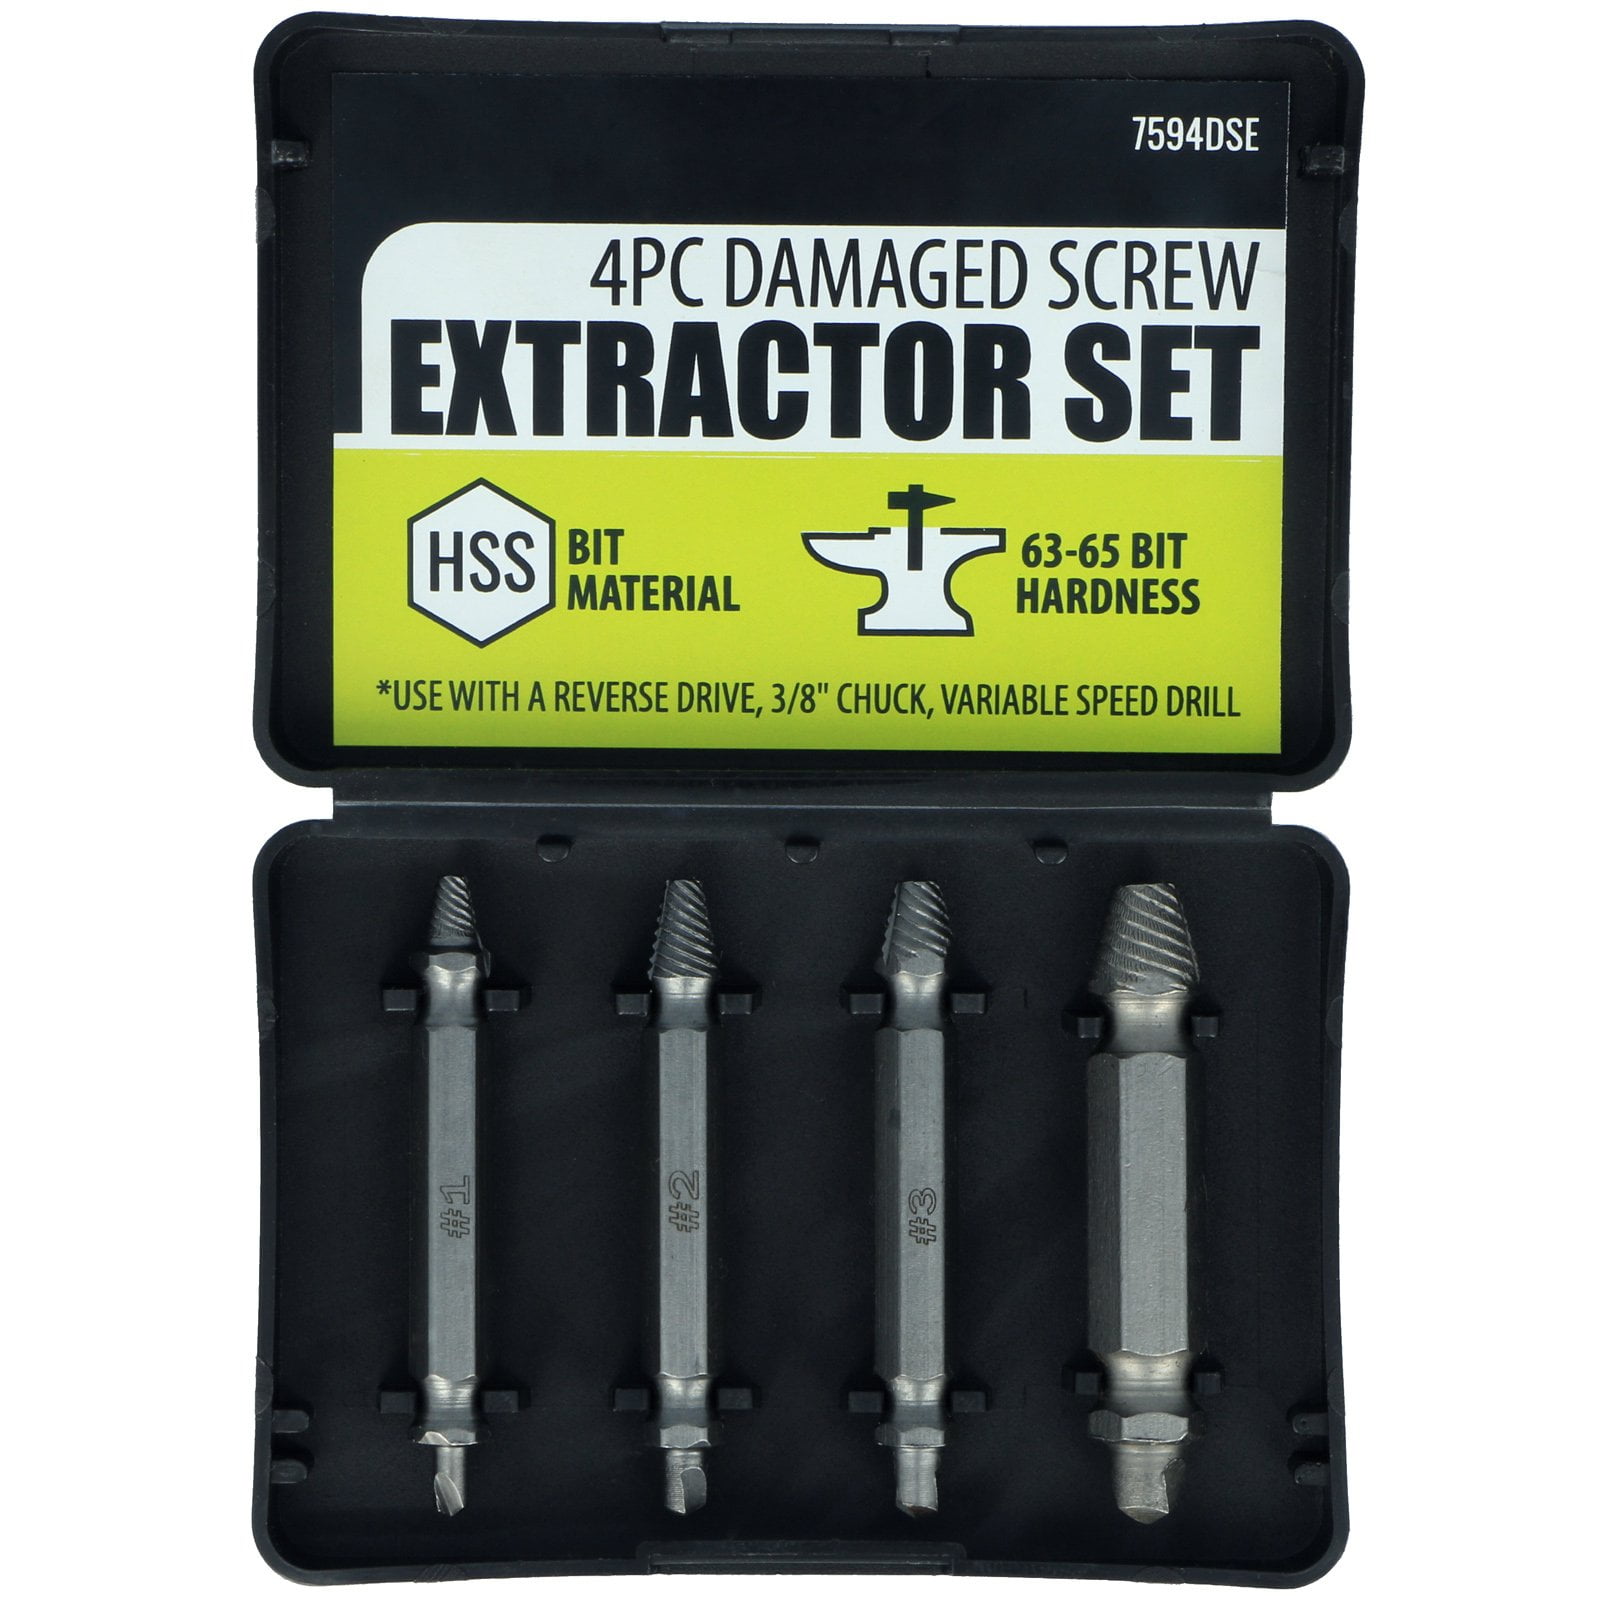 NEW RELEASE TORX STAR SCREW EXTRACTOR DAMAGED FIXING TOOL KIT 